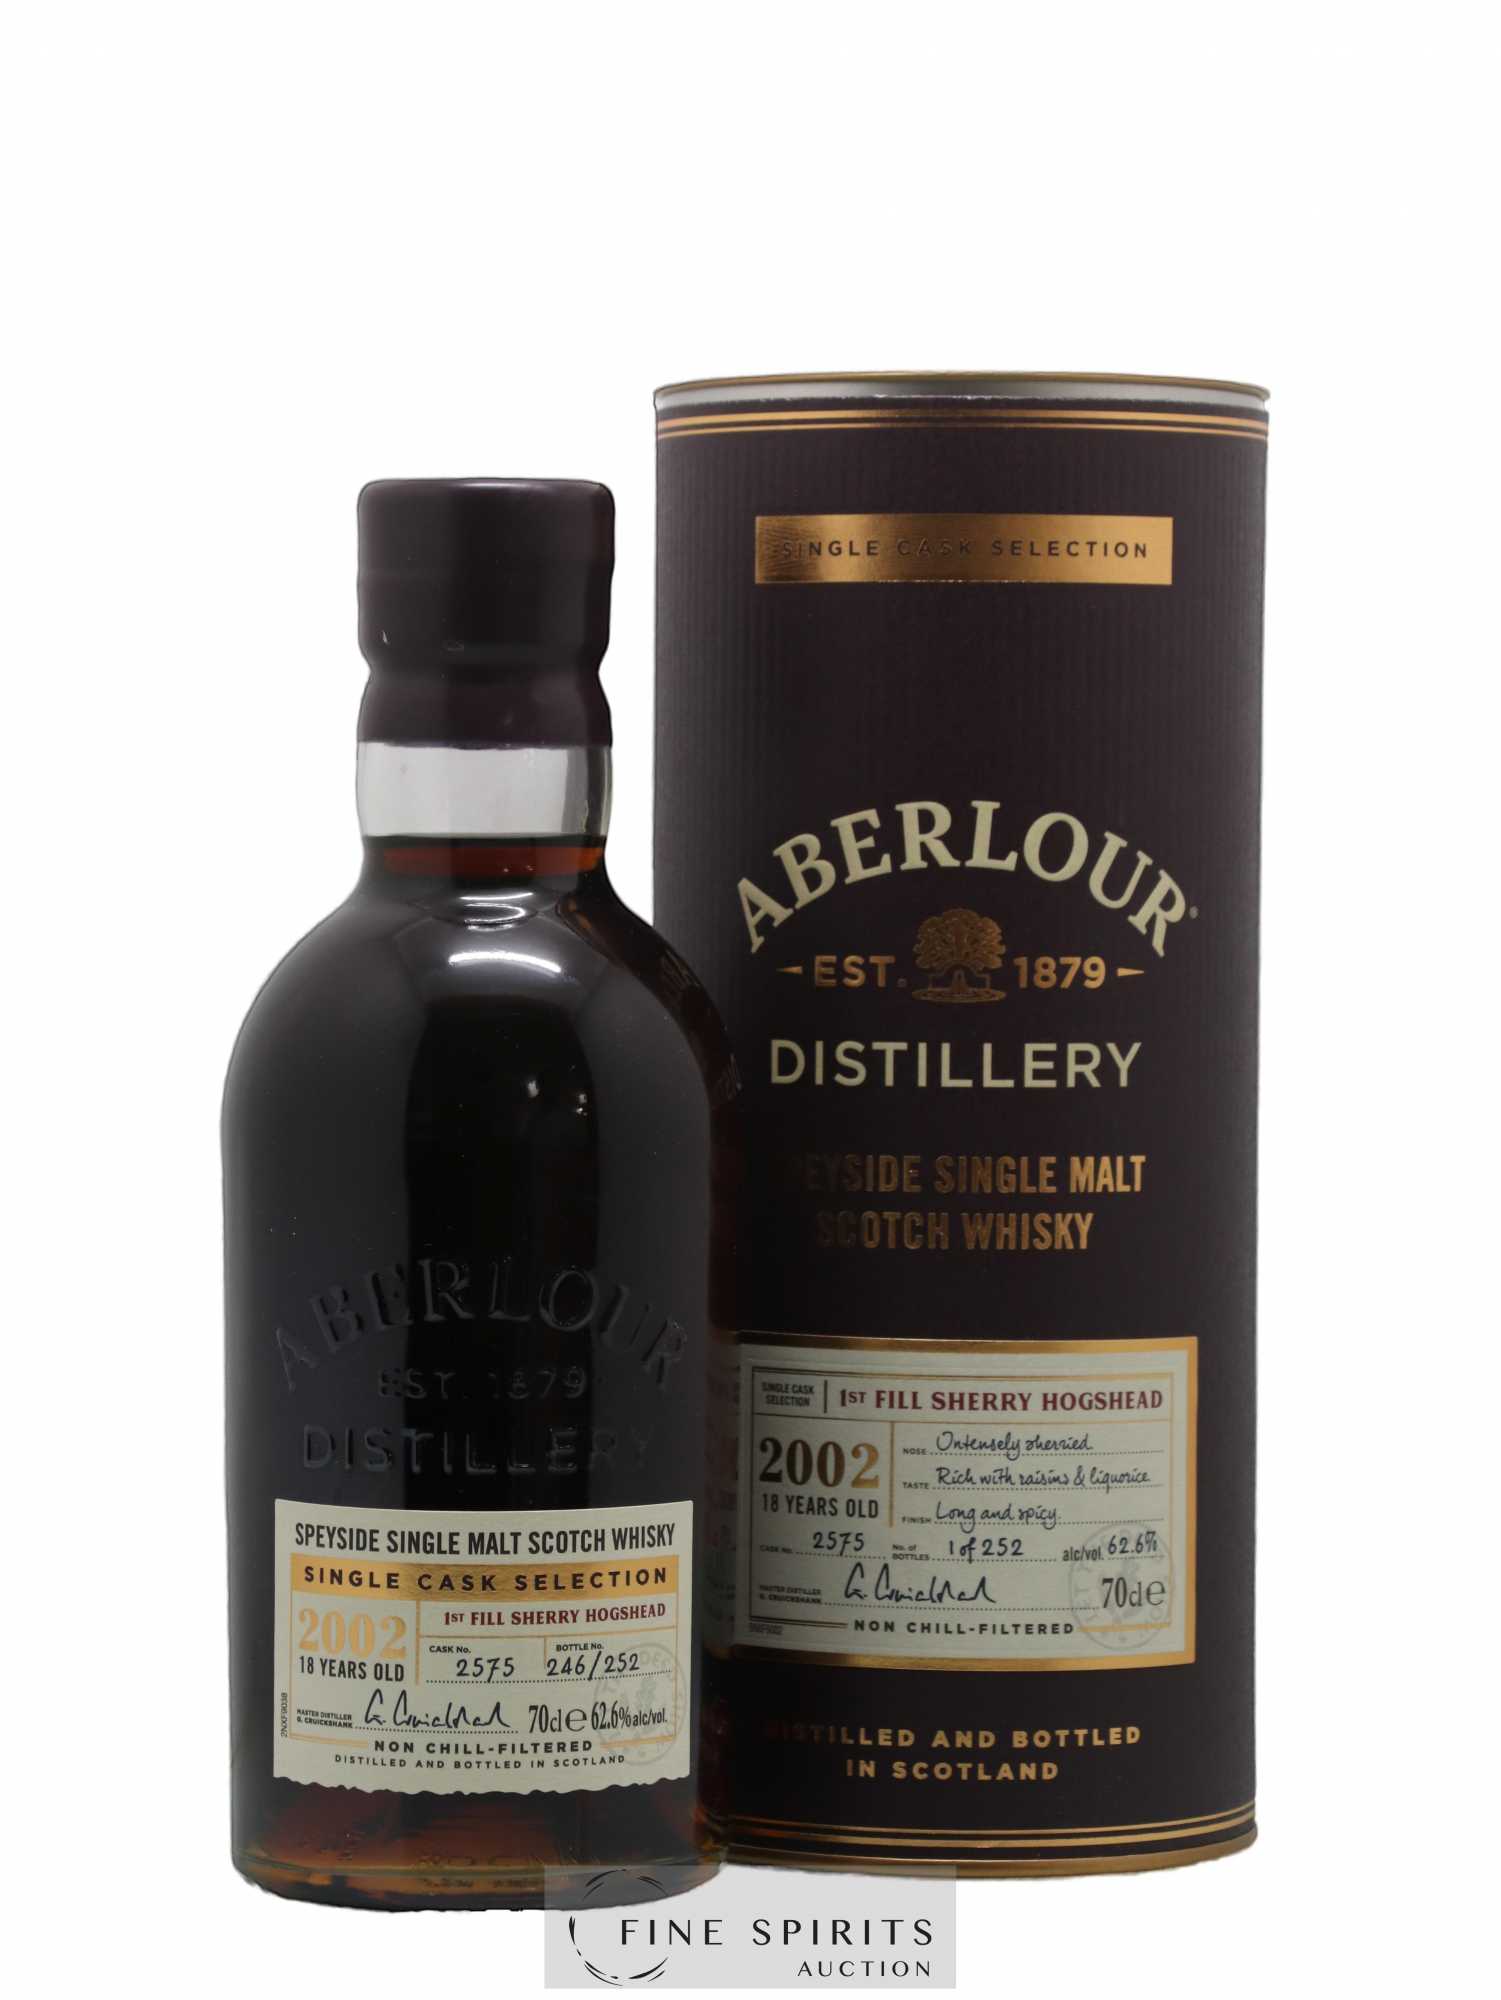 Aberlour 18 years 2002 Of. Cask n°2575 - One of 252 Single Cask Selection 